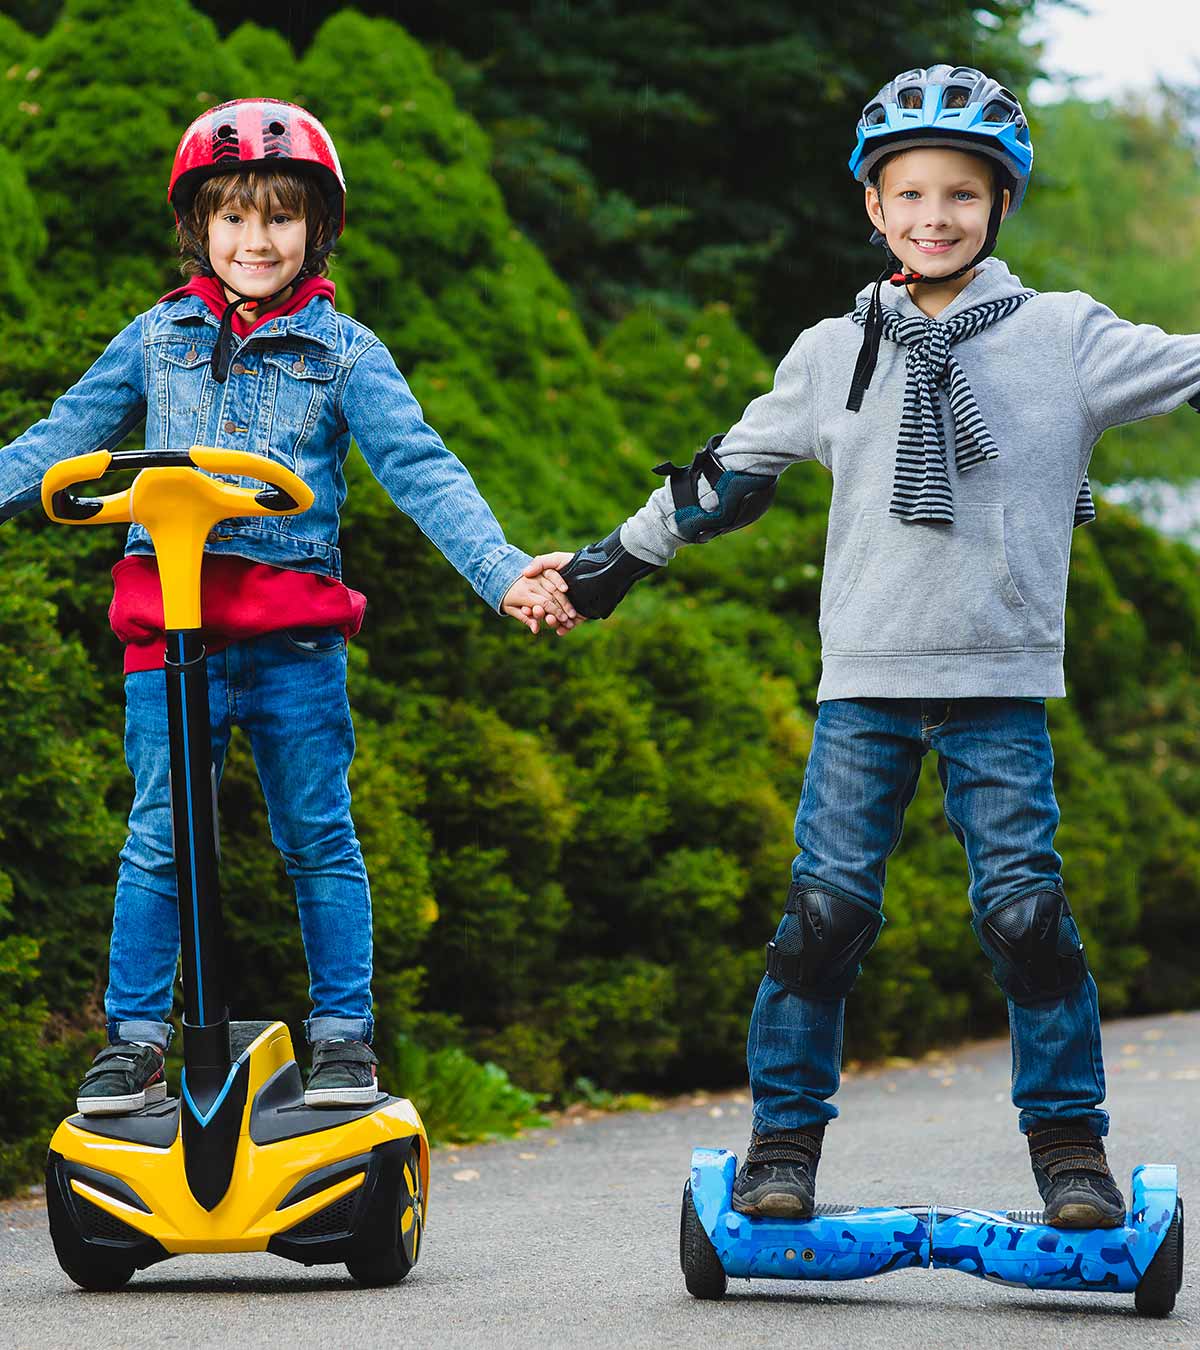 15 Best Hoverboards For Kids To Ride, According To E-Bikeist 2023